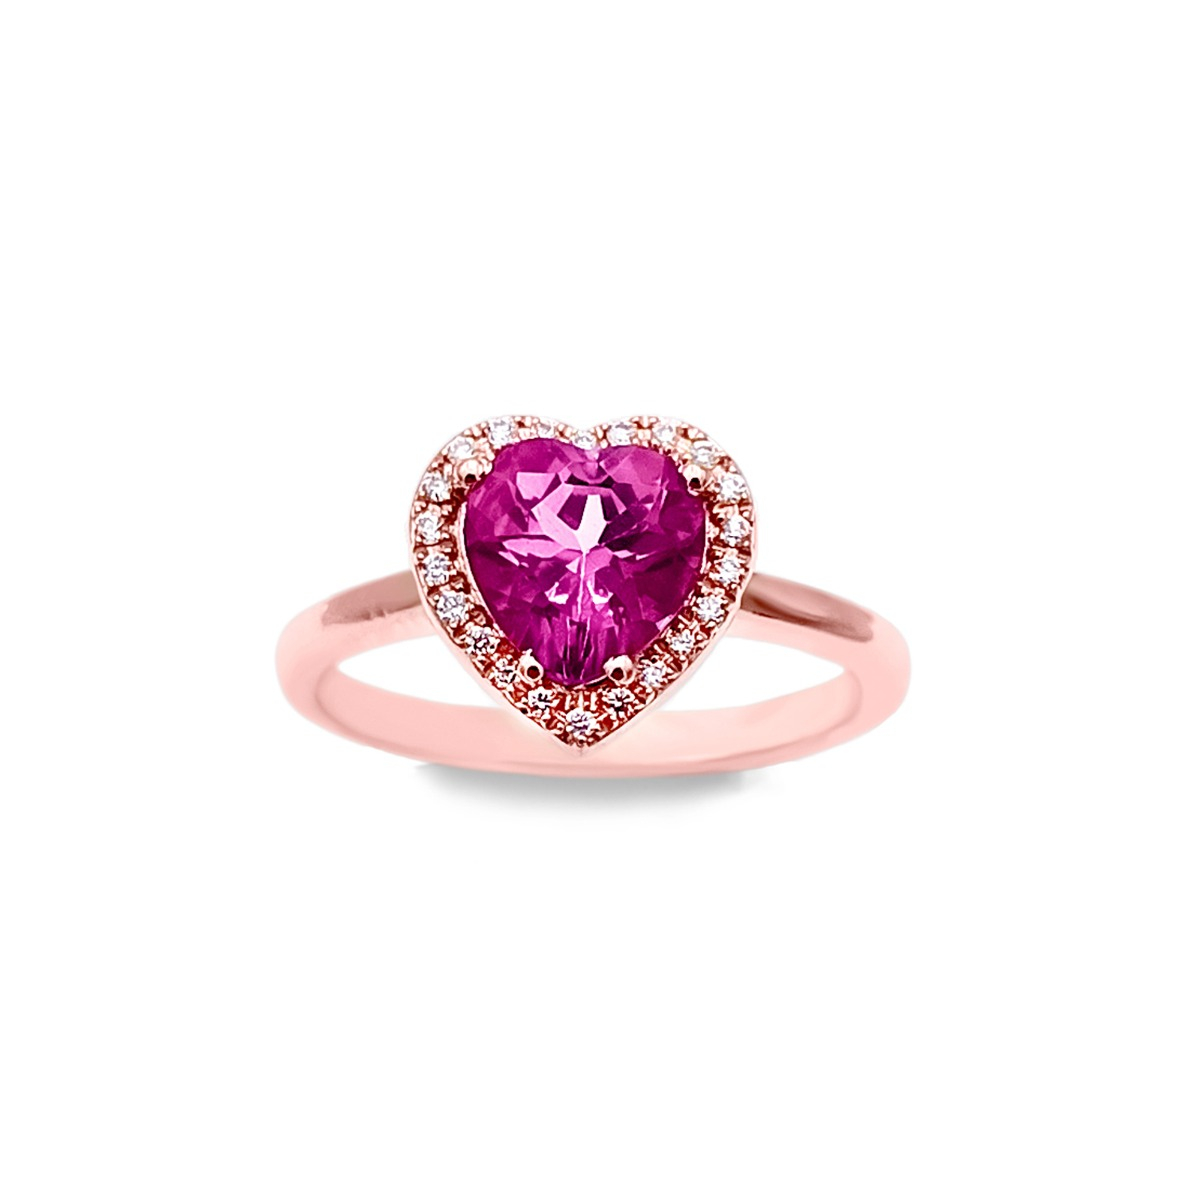 Elegant Ring In 18kt Rose Gold And Diamonds With Heart-Shaped Pink Topaz